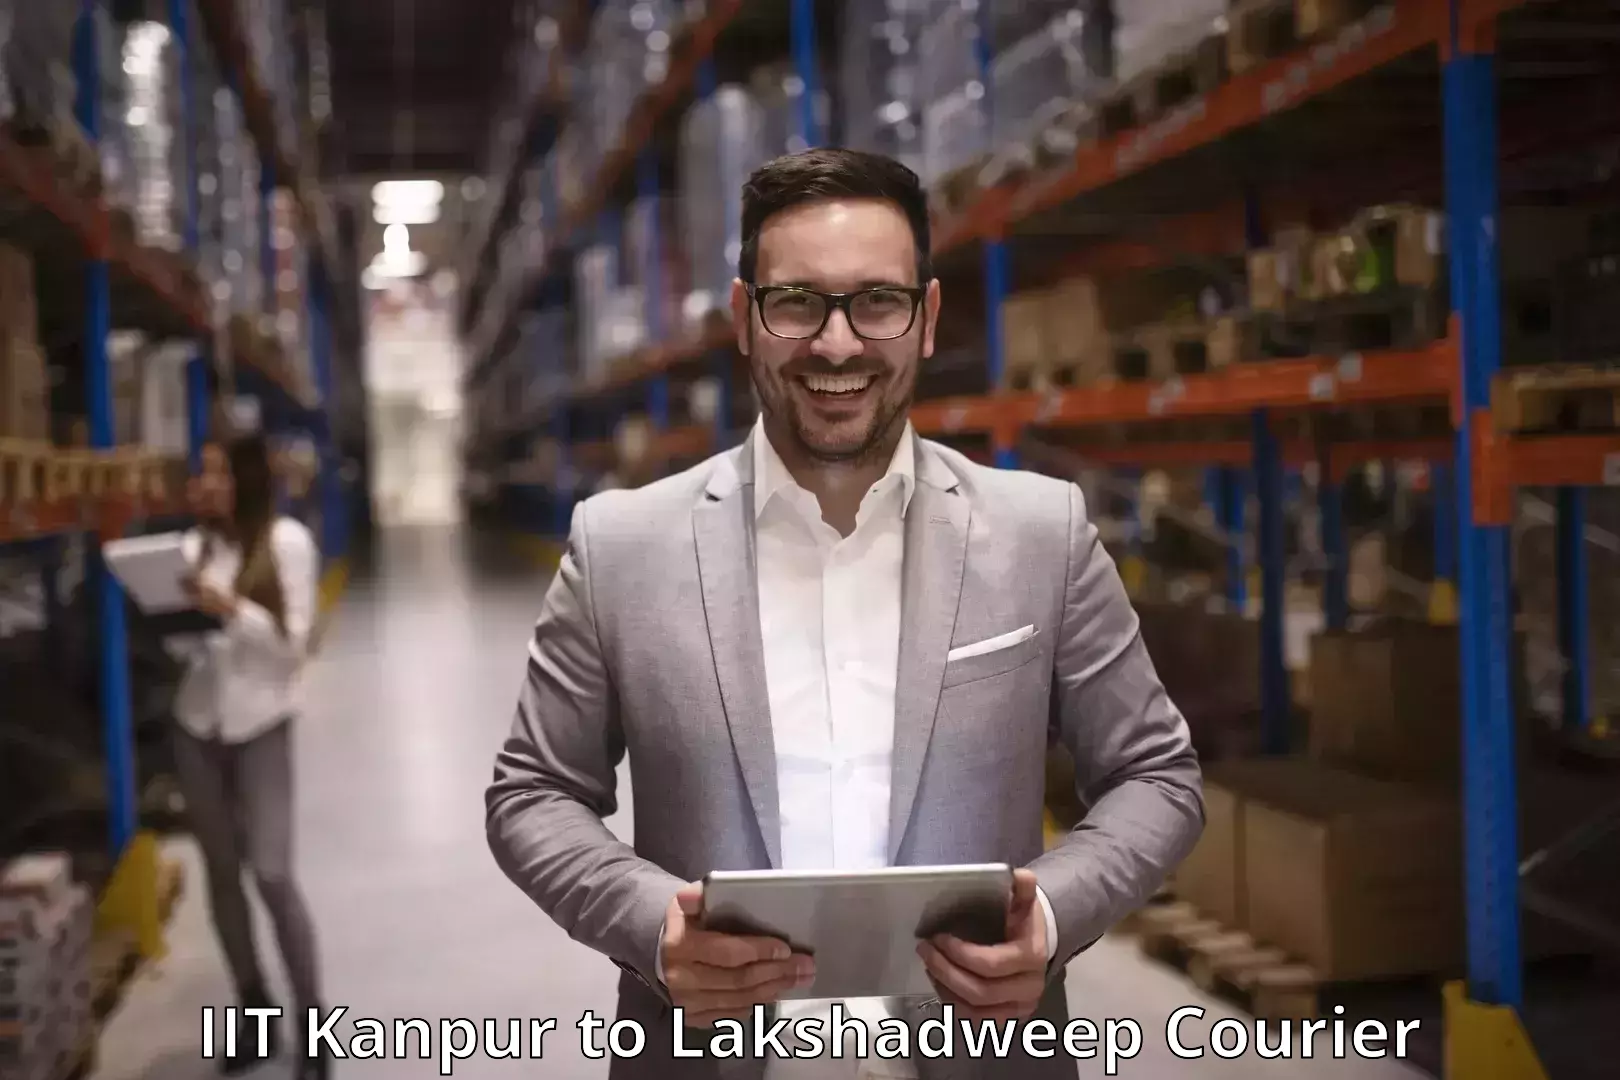 Special handling courier IIT Kanpur to Lakshadweep